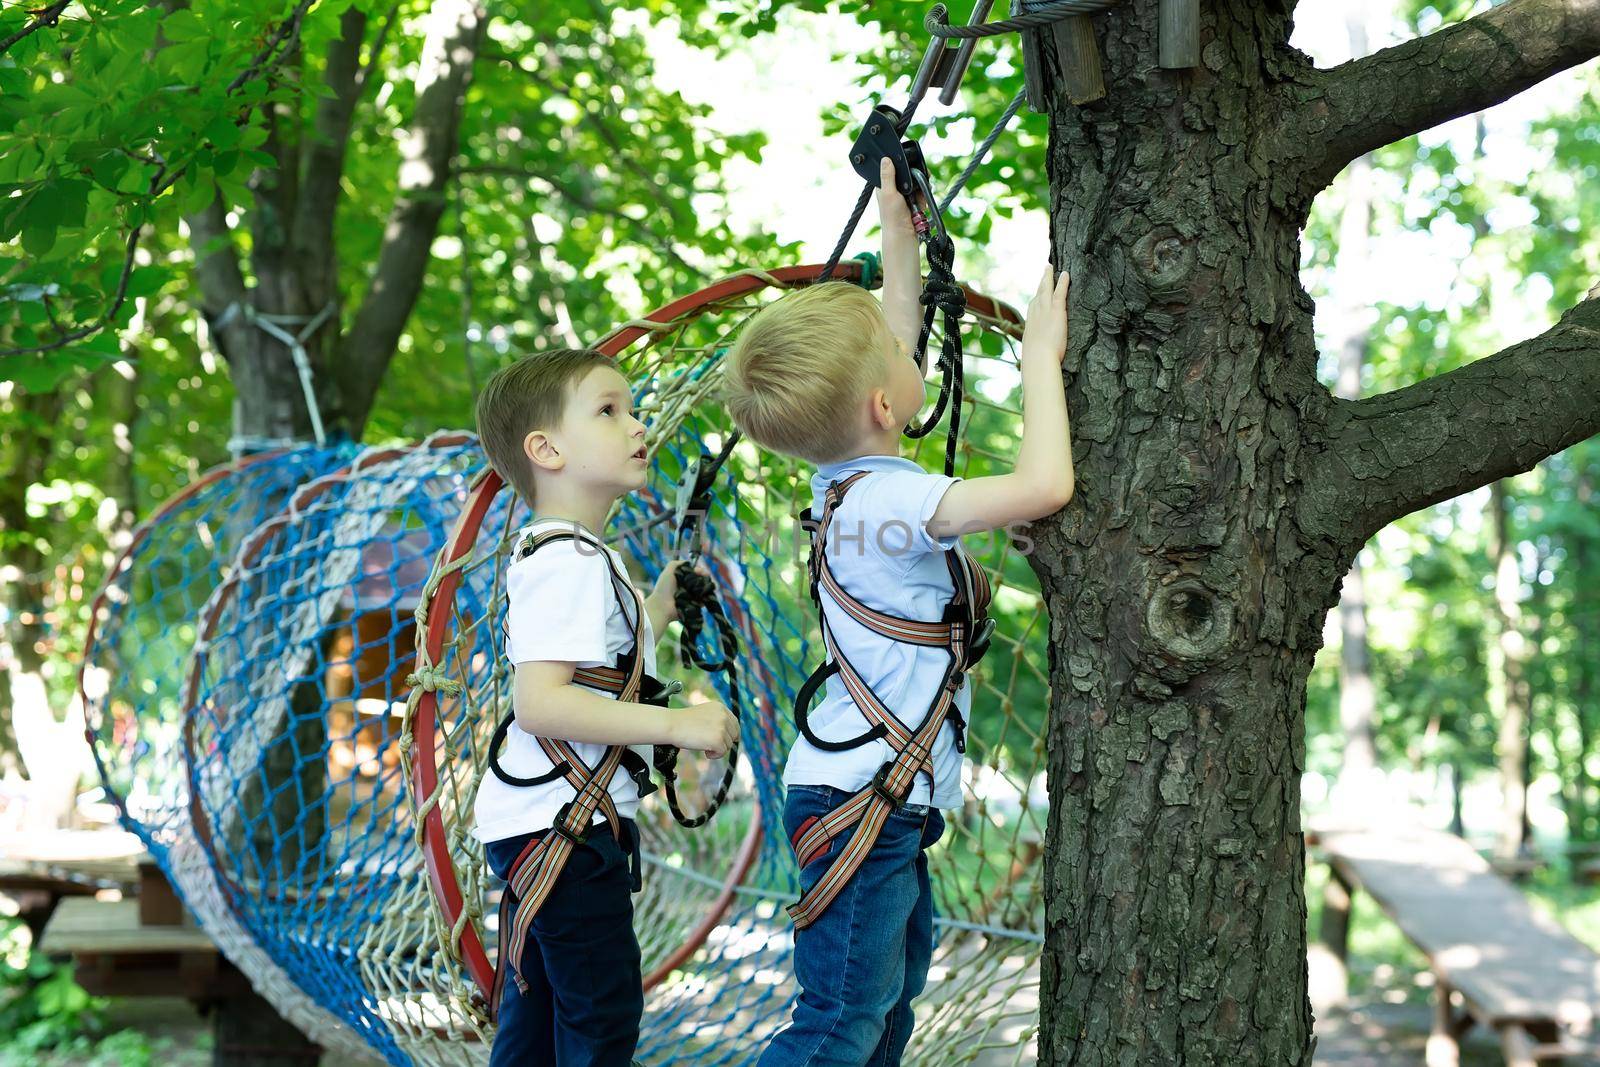 A little boy helps his friend with equipment in a rope park by StudioPeace